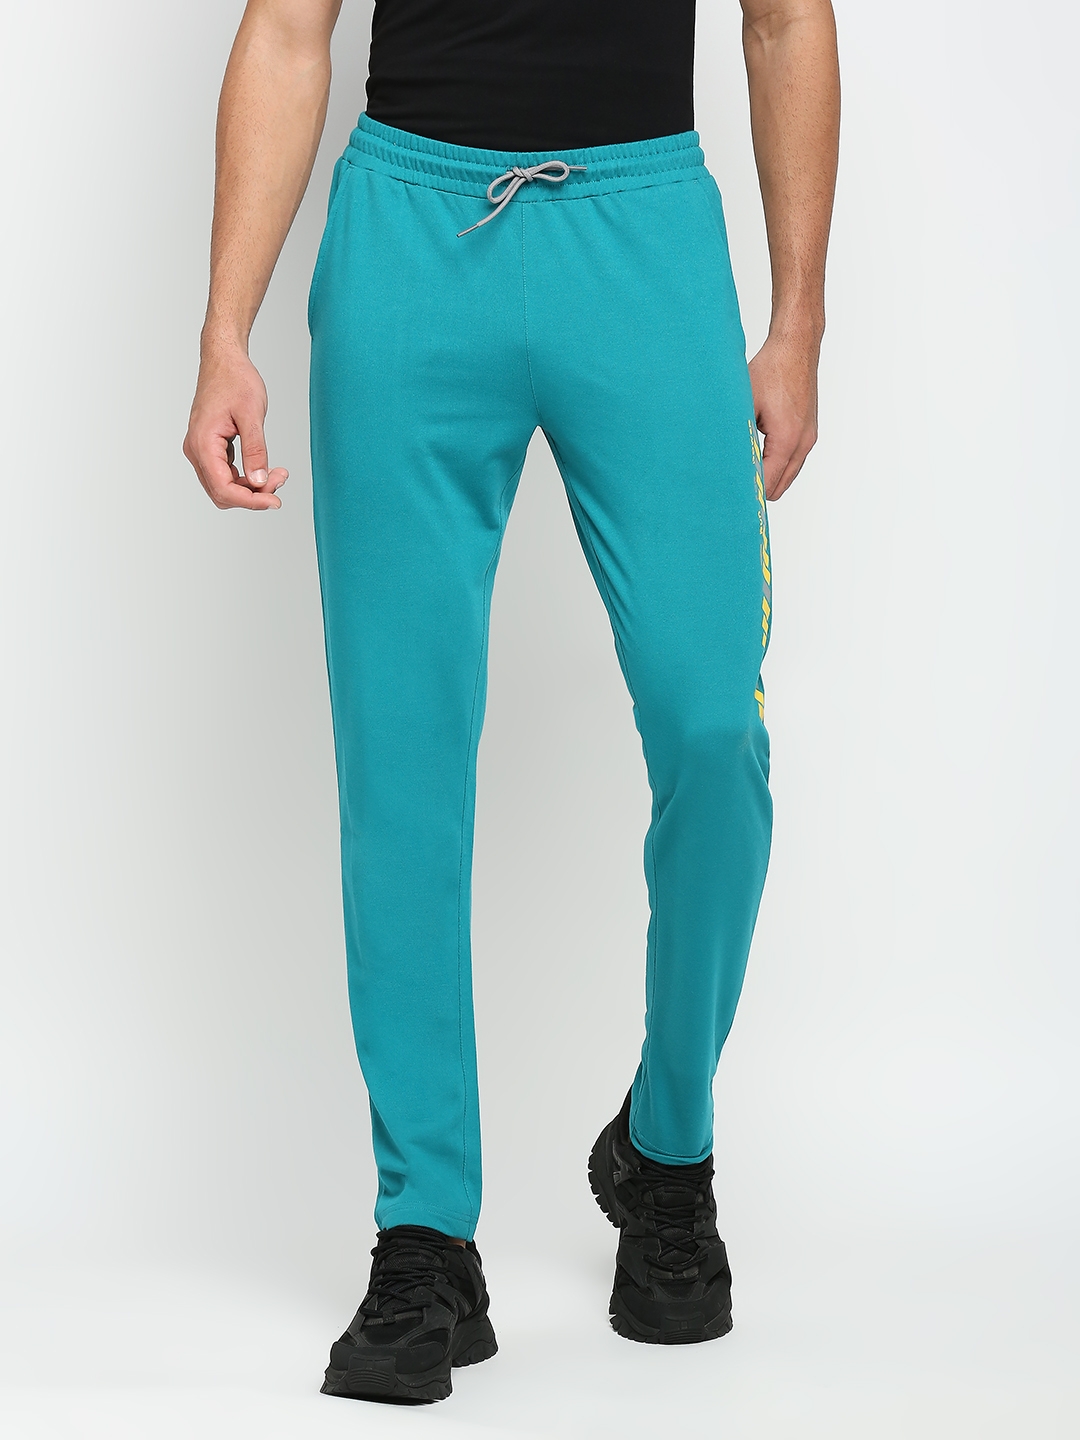 FITZ | FiTZ Cotton Polyester Slim Fit French Terry Knit Joggers For Mens - Blue